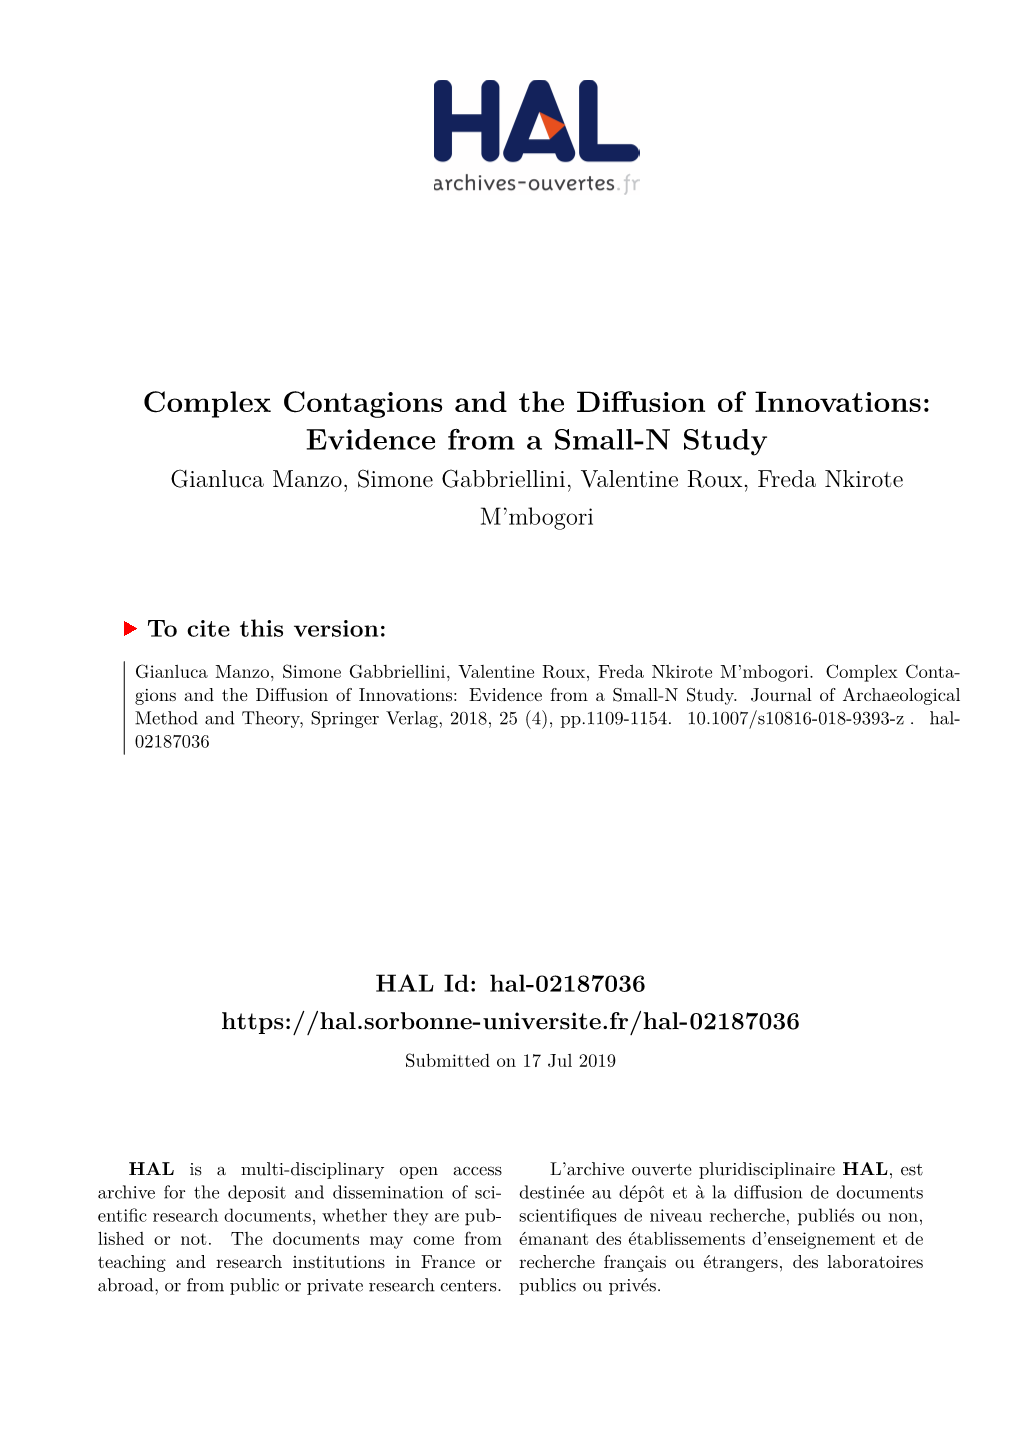 Complex Contagions and the Diffusion of Innovations: Evidence from a Small-N Study Gianluca Manzo, Simone Gabbriellini, Valentine Roux, Freda Nkirote M’Mbogori